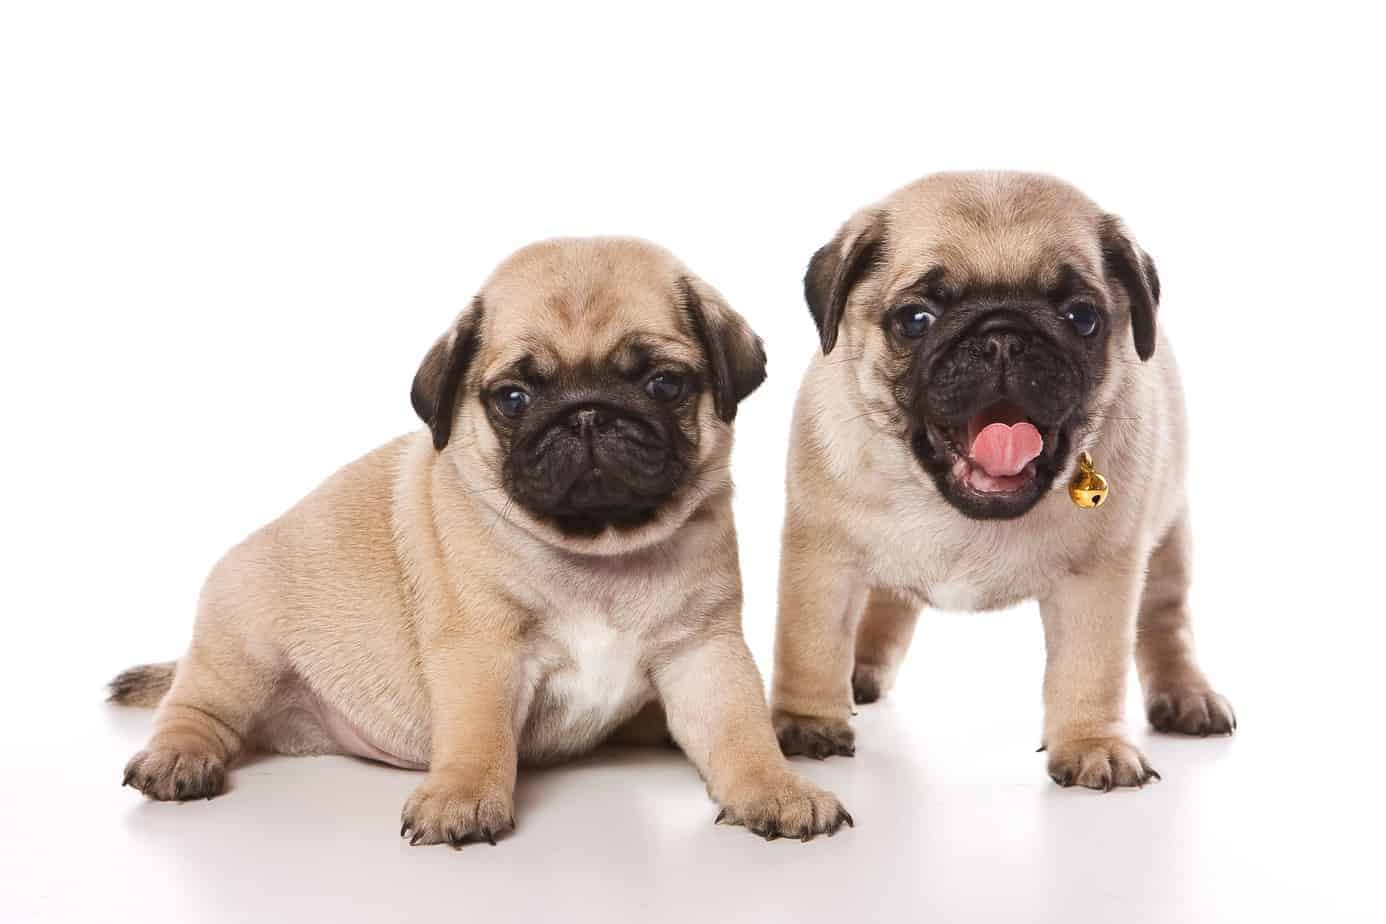 Two Pug puppies, one with tongue sticking out. A Pug should have at least two 20-minute sessions of exercise per day. Moderate exercise is crucial to help maintain the Pug's weight.